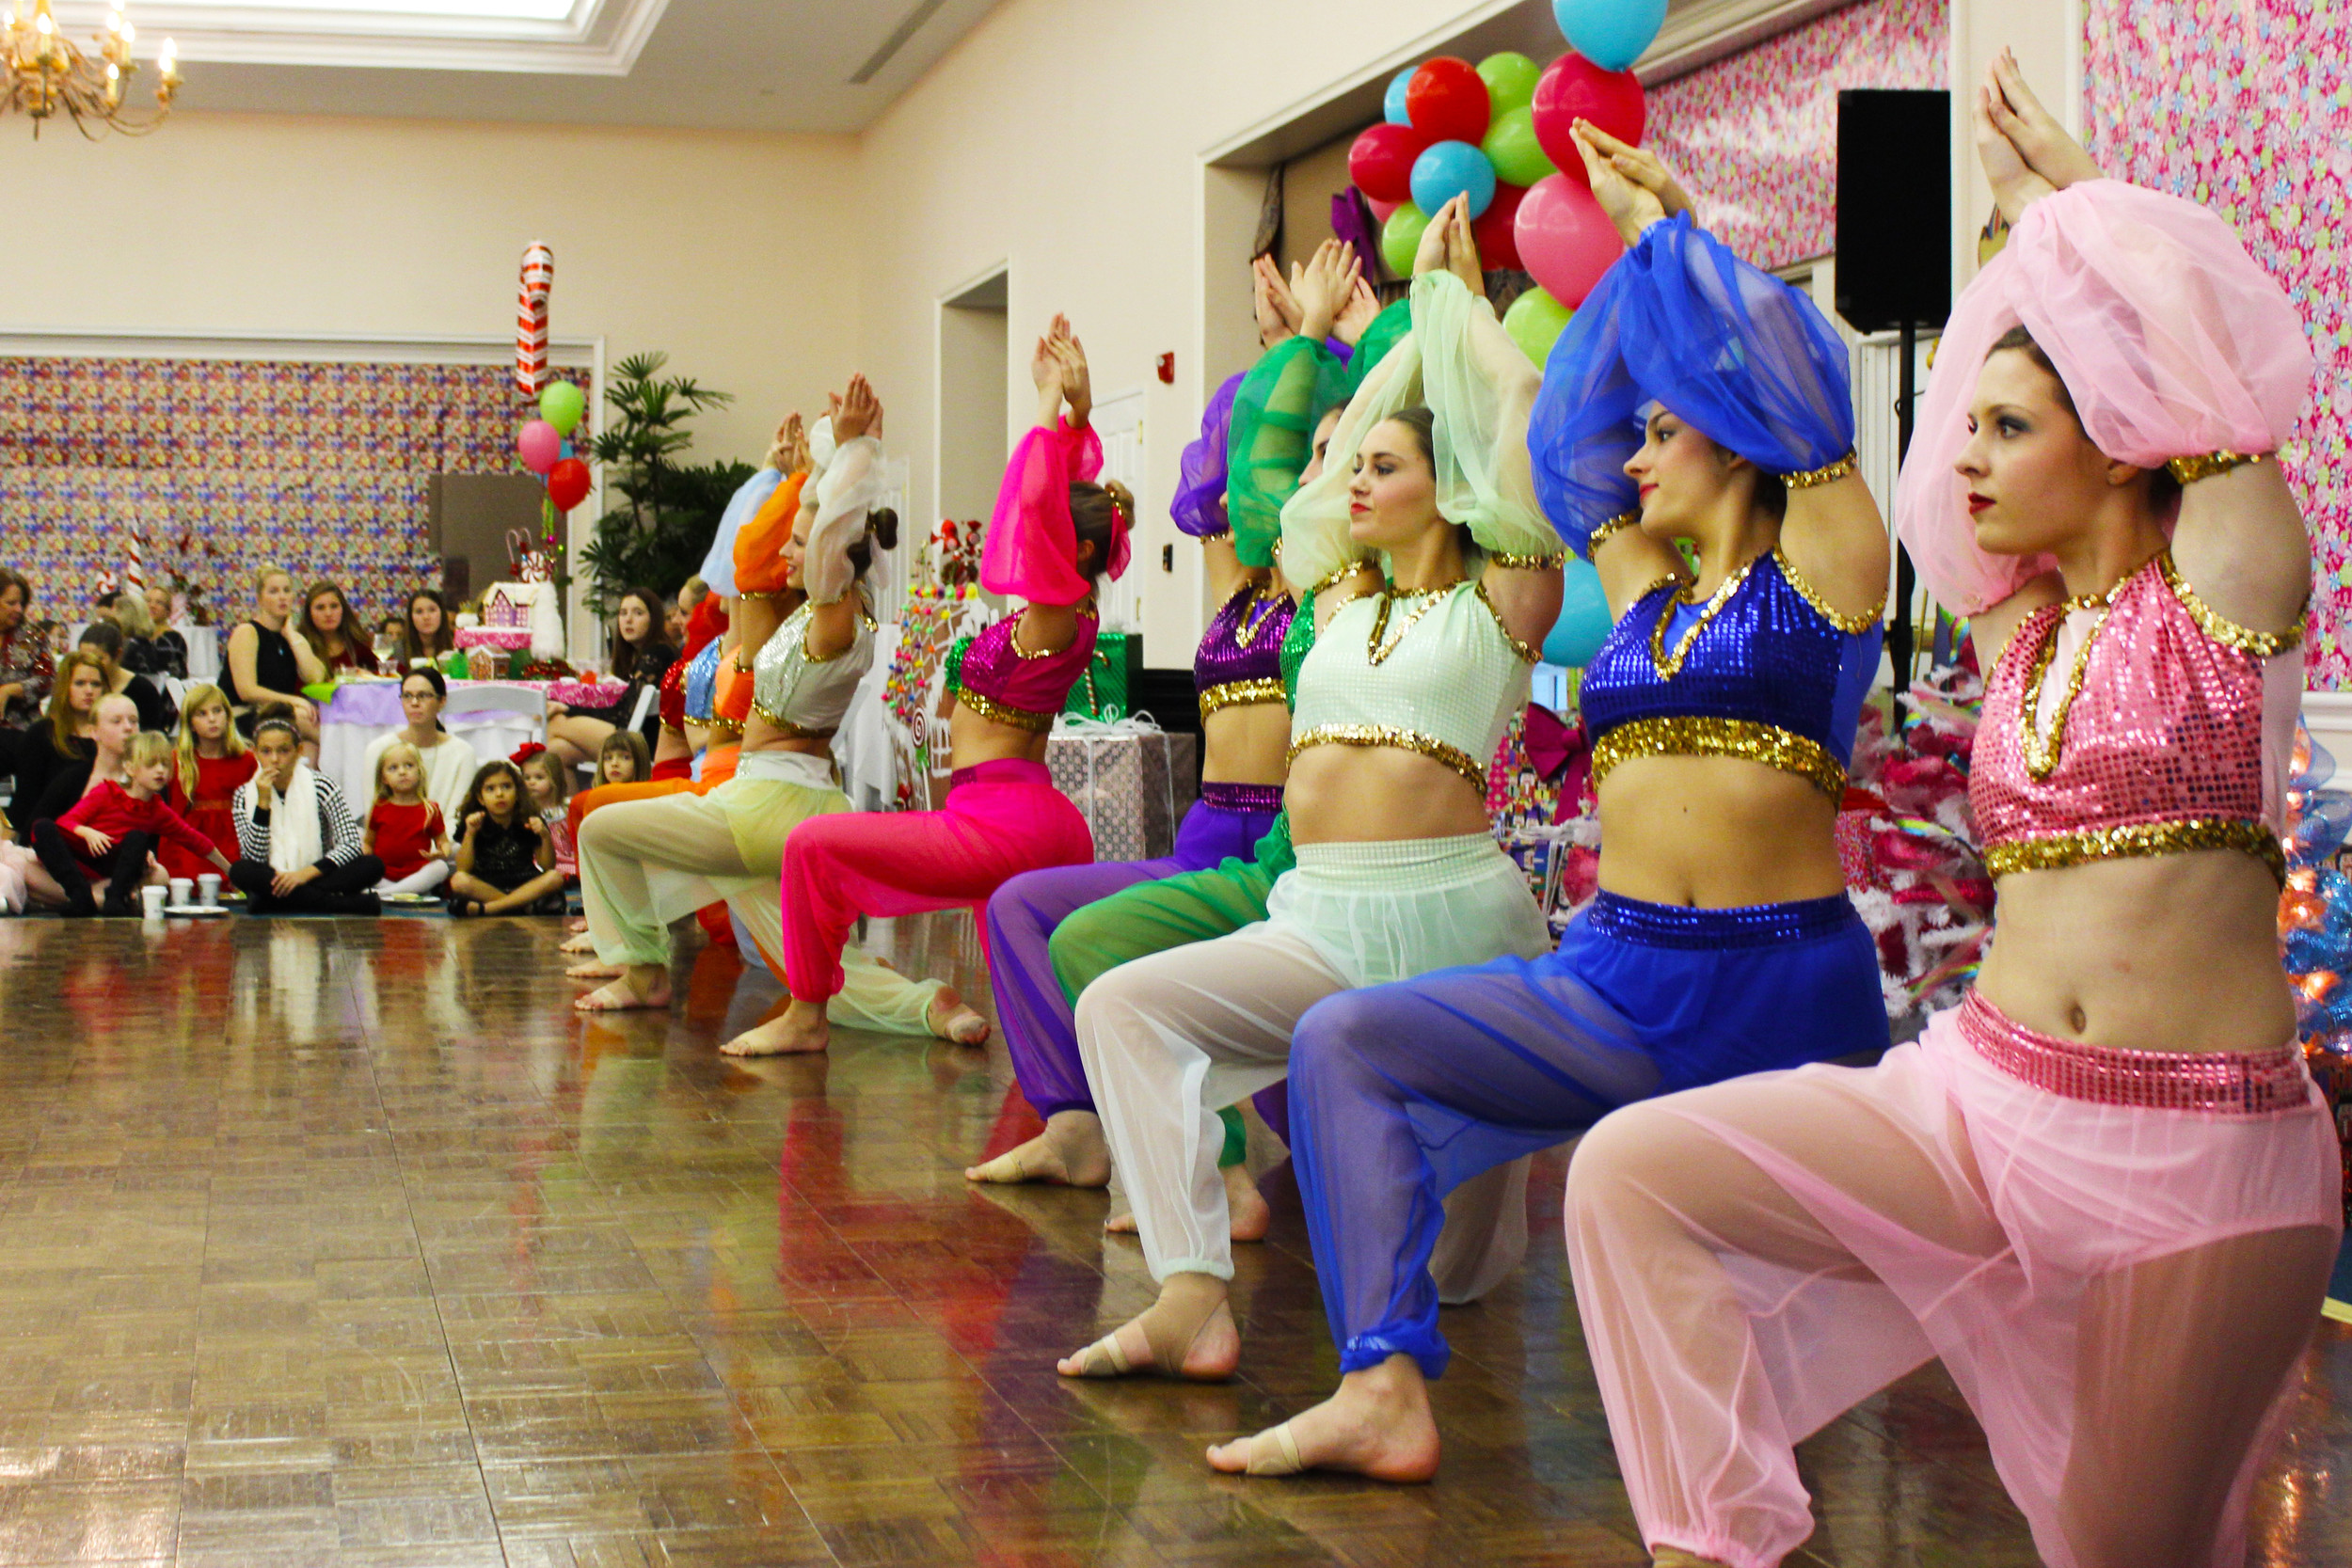 The "Arabian Dancers" from the upcoming Nutcracker presented a group dance.